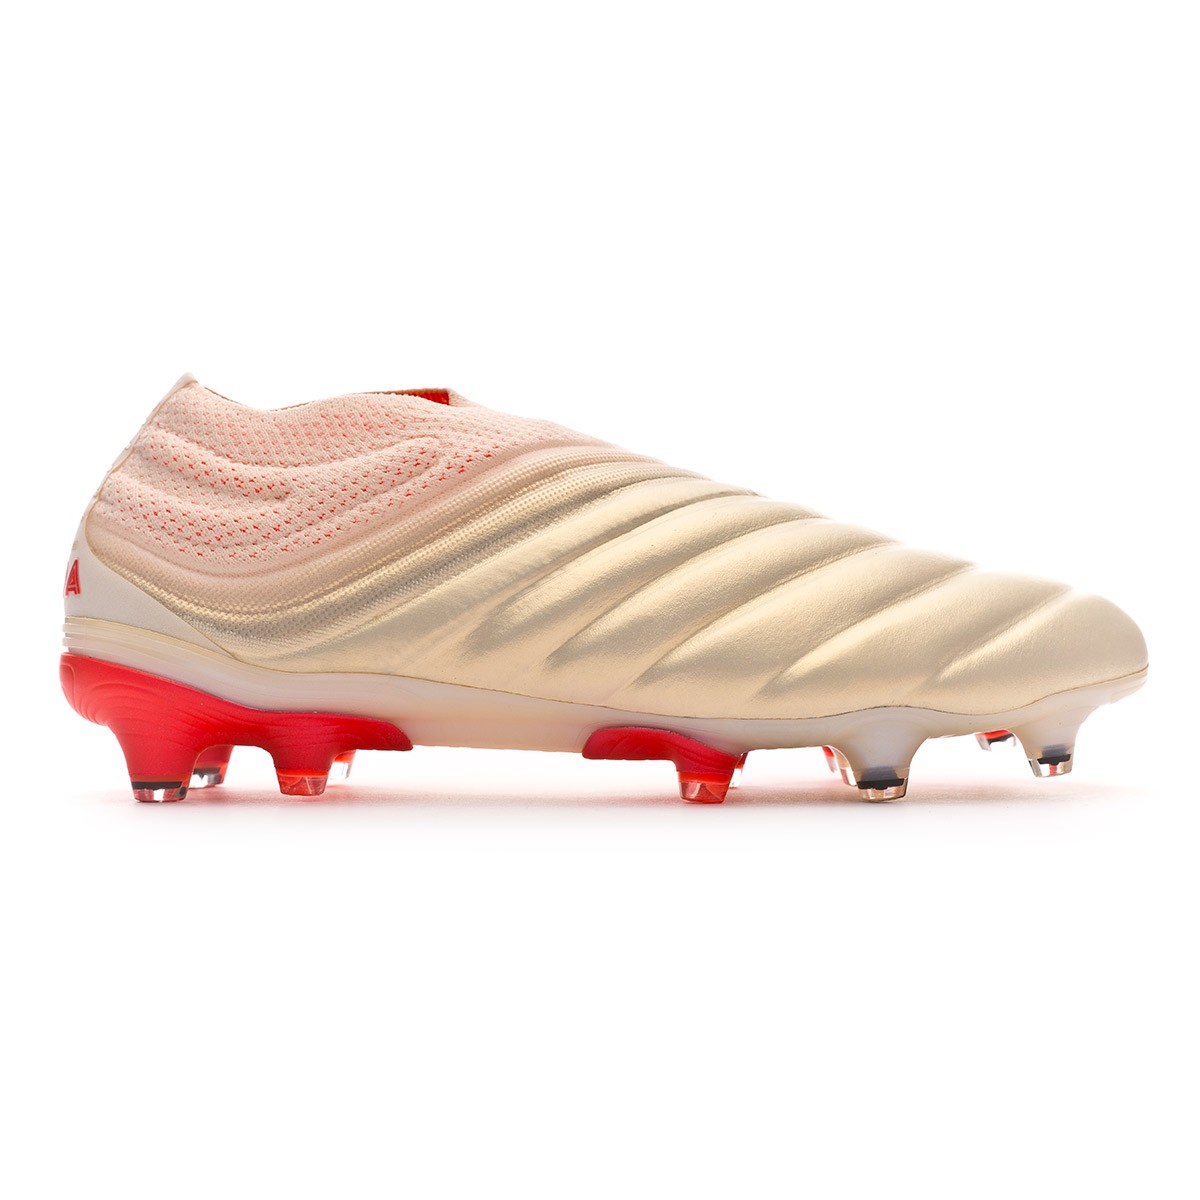 red and white adidas football boots